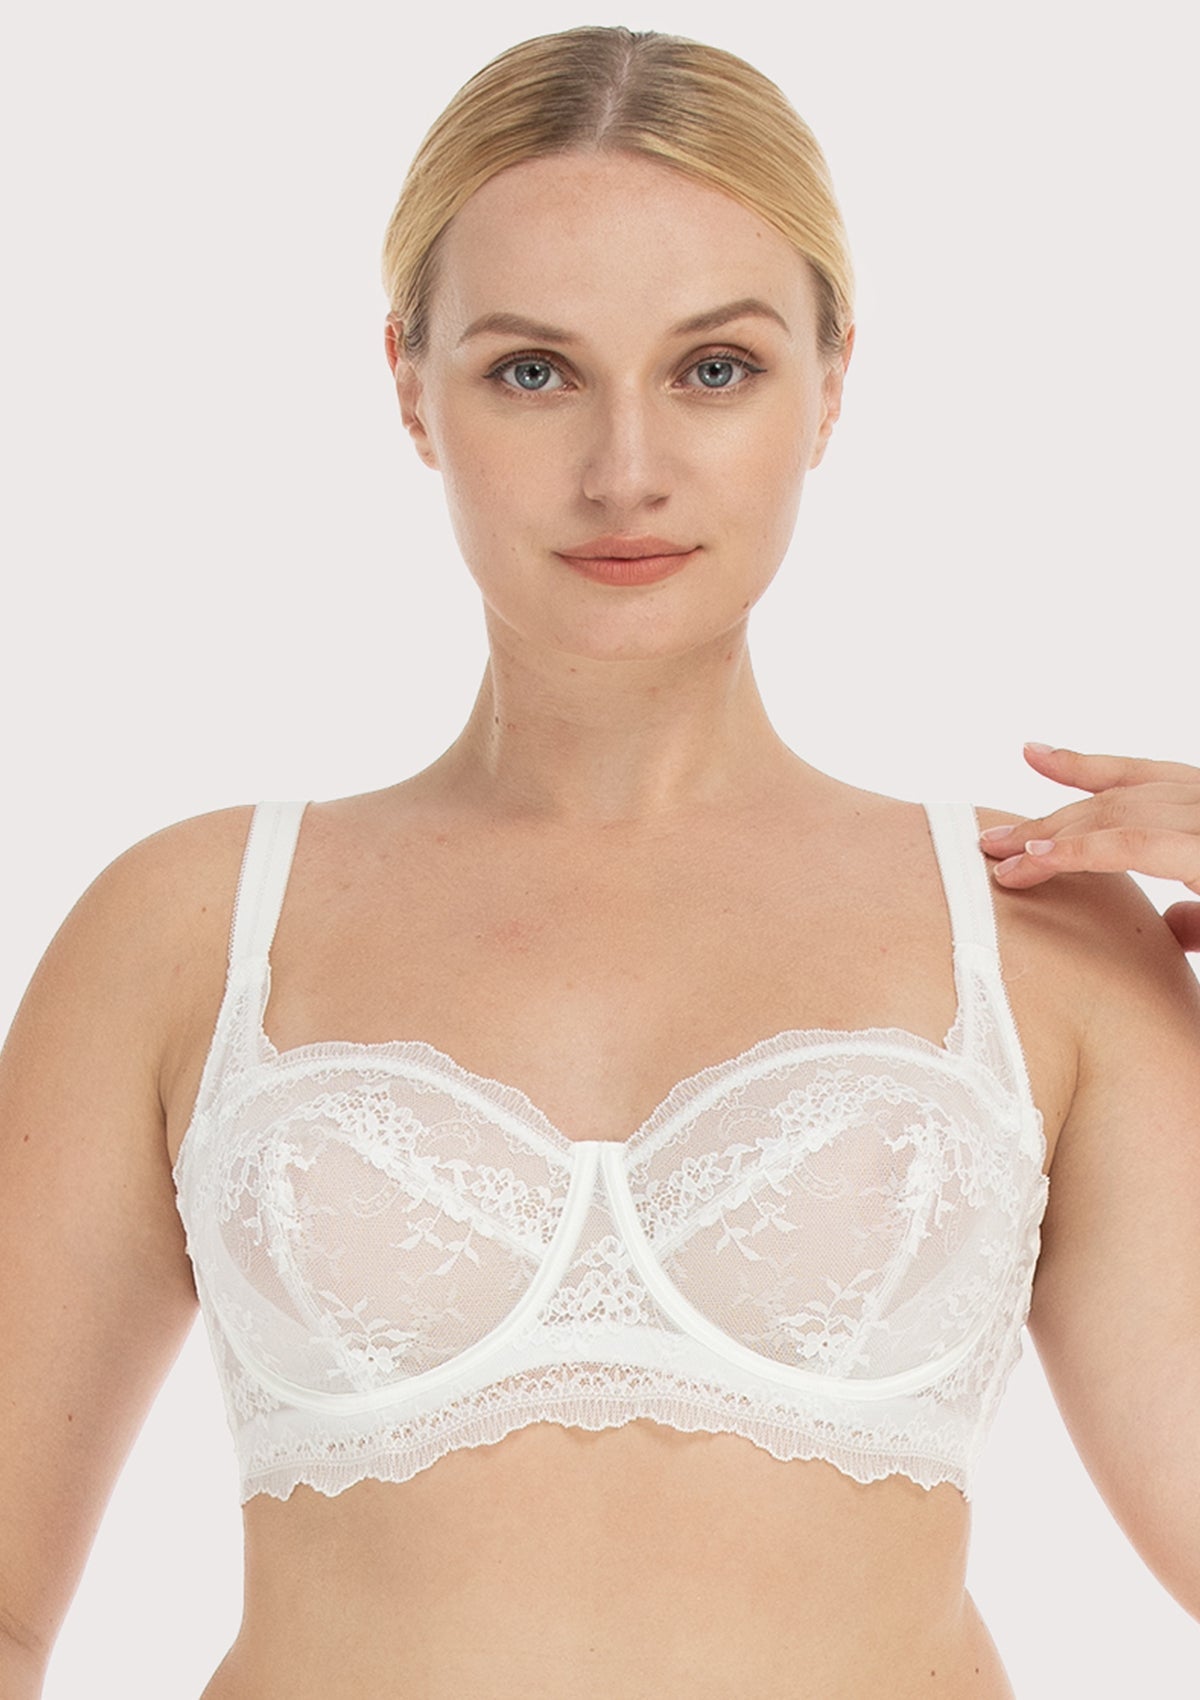 HSIA I Do Floral Lace Bridal Balconette Beautiful Bra For Special Day - Pink / 40 / DDD/F